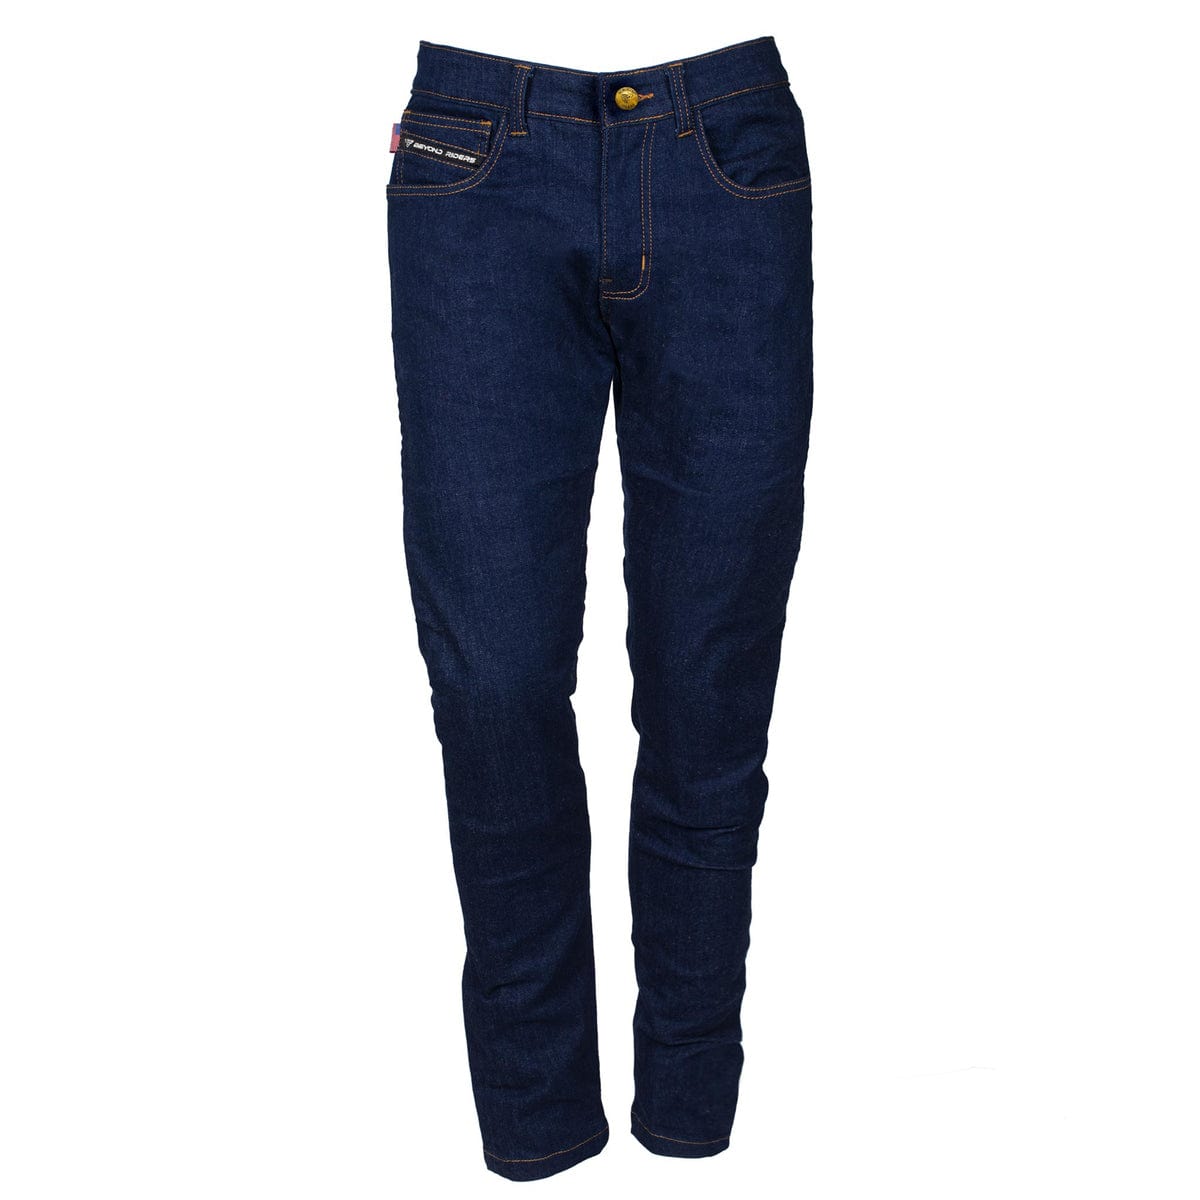 Straight Leg Protective Jeans - Blue with Pads